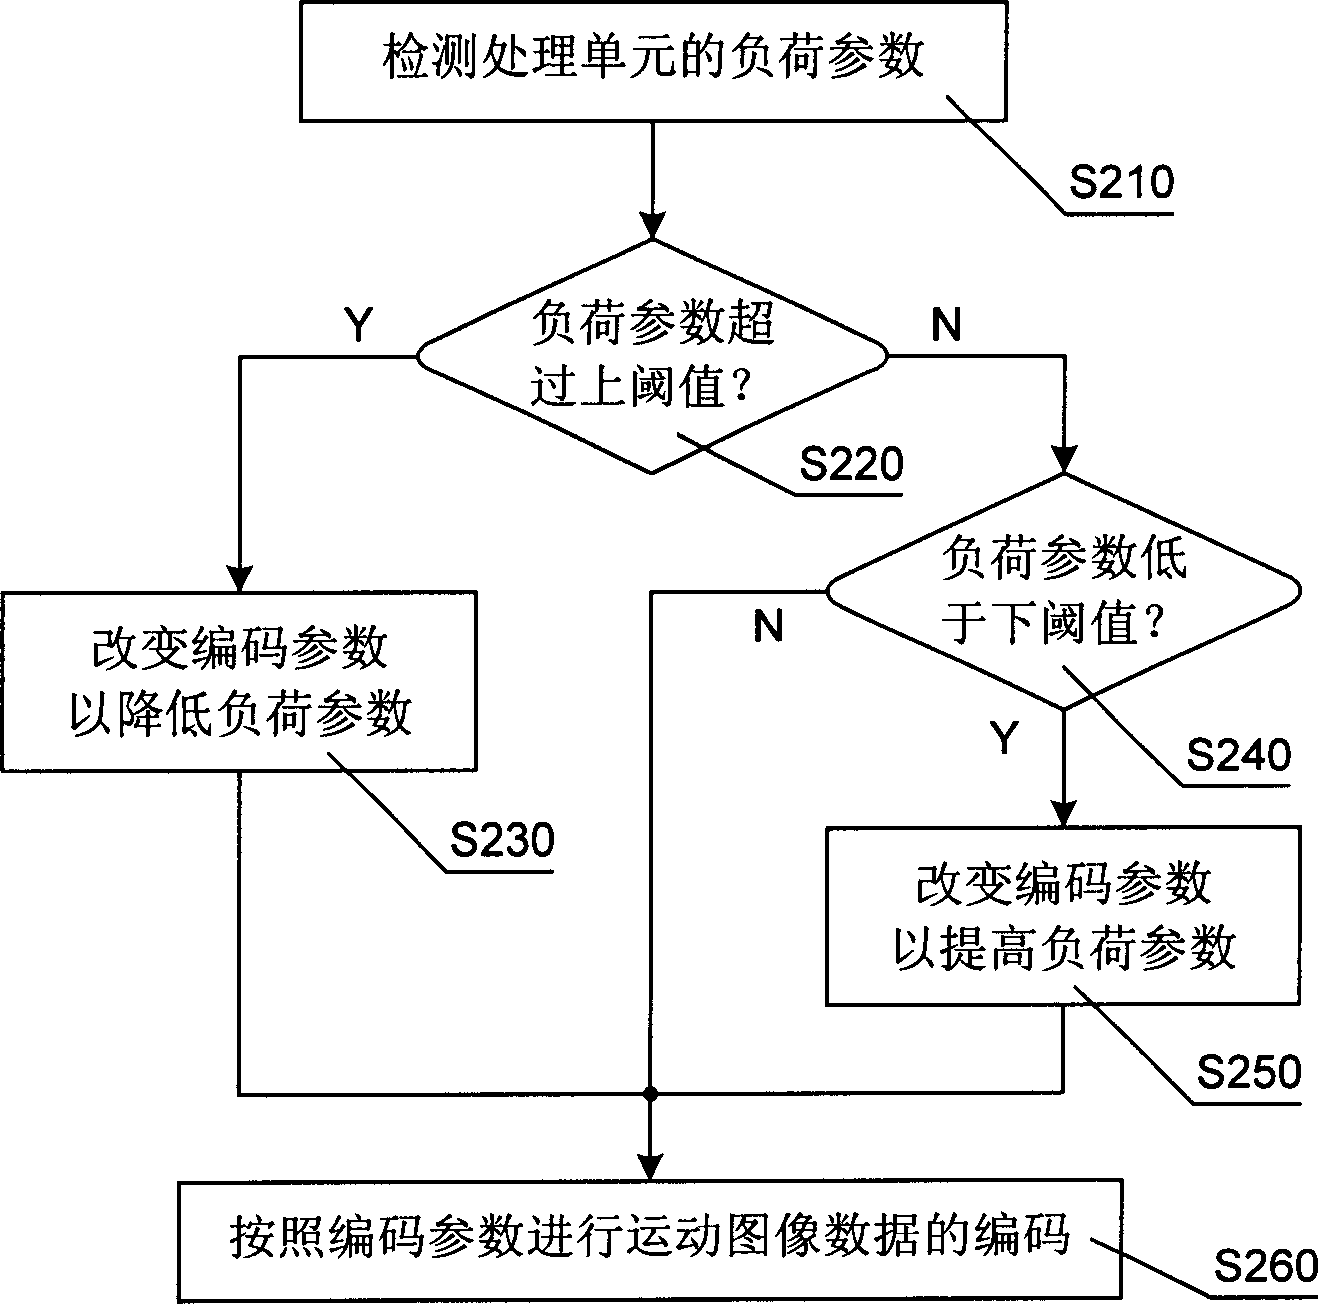 Motion image code controlling method and code device